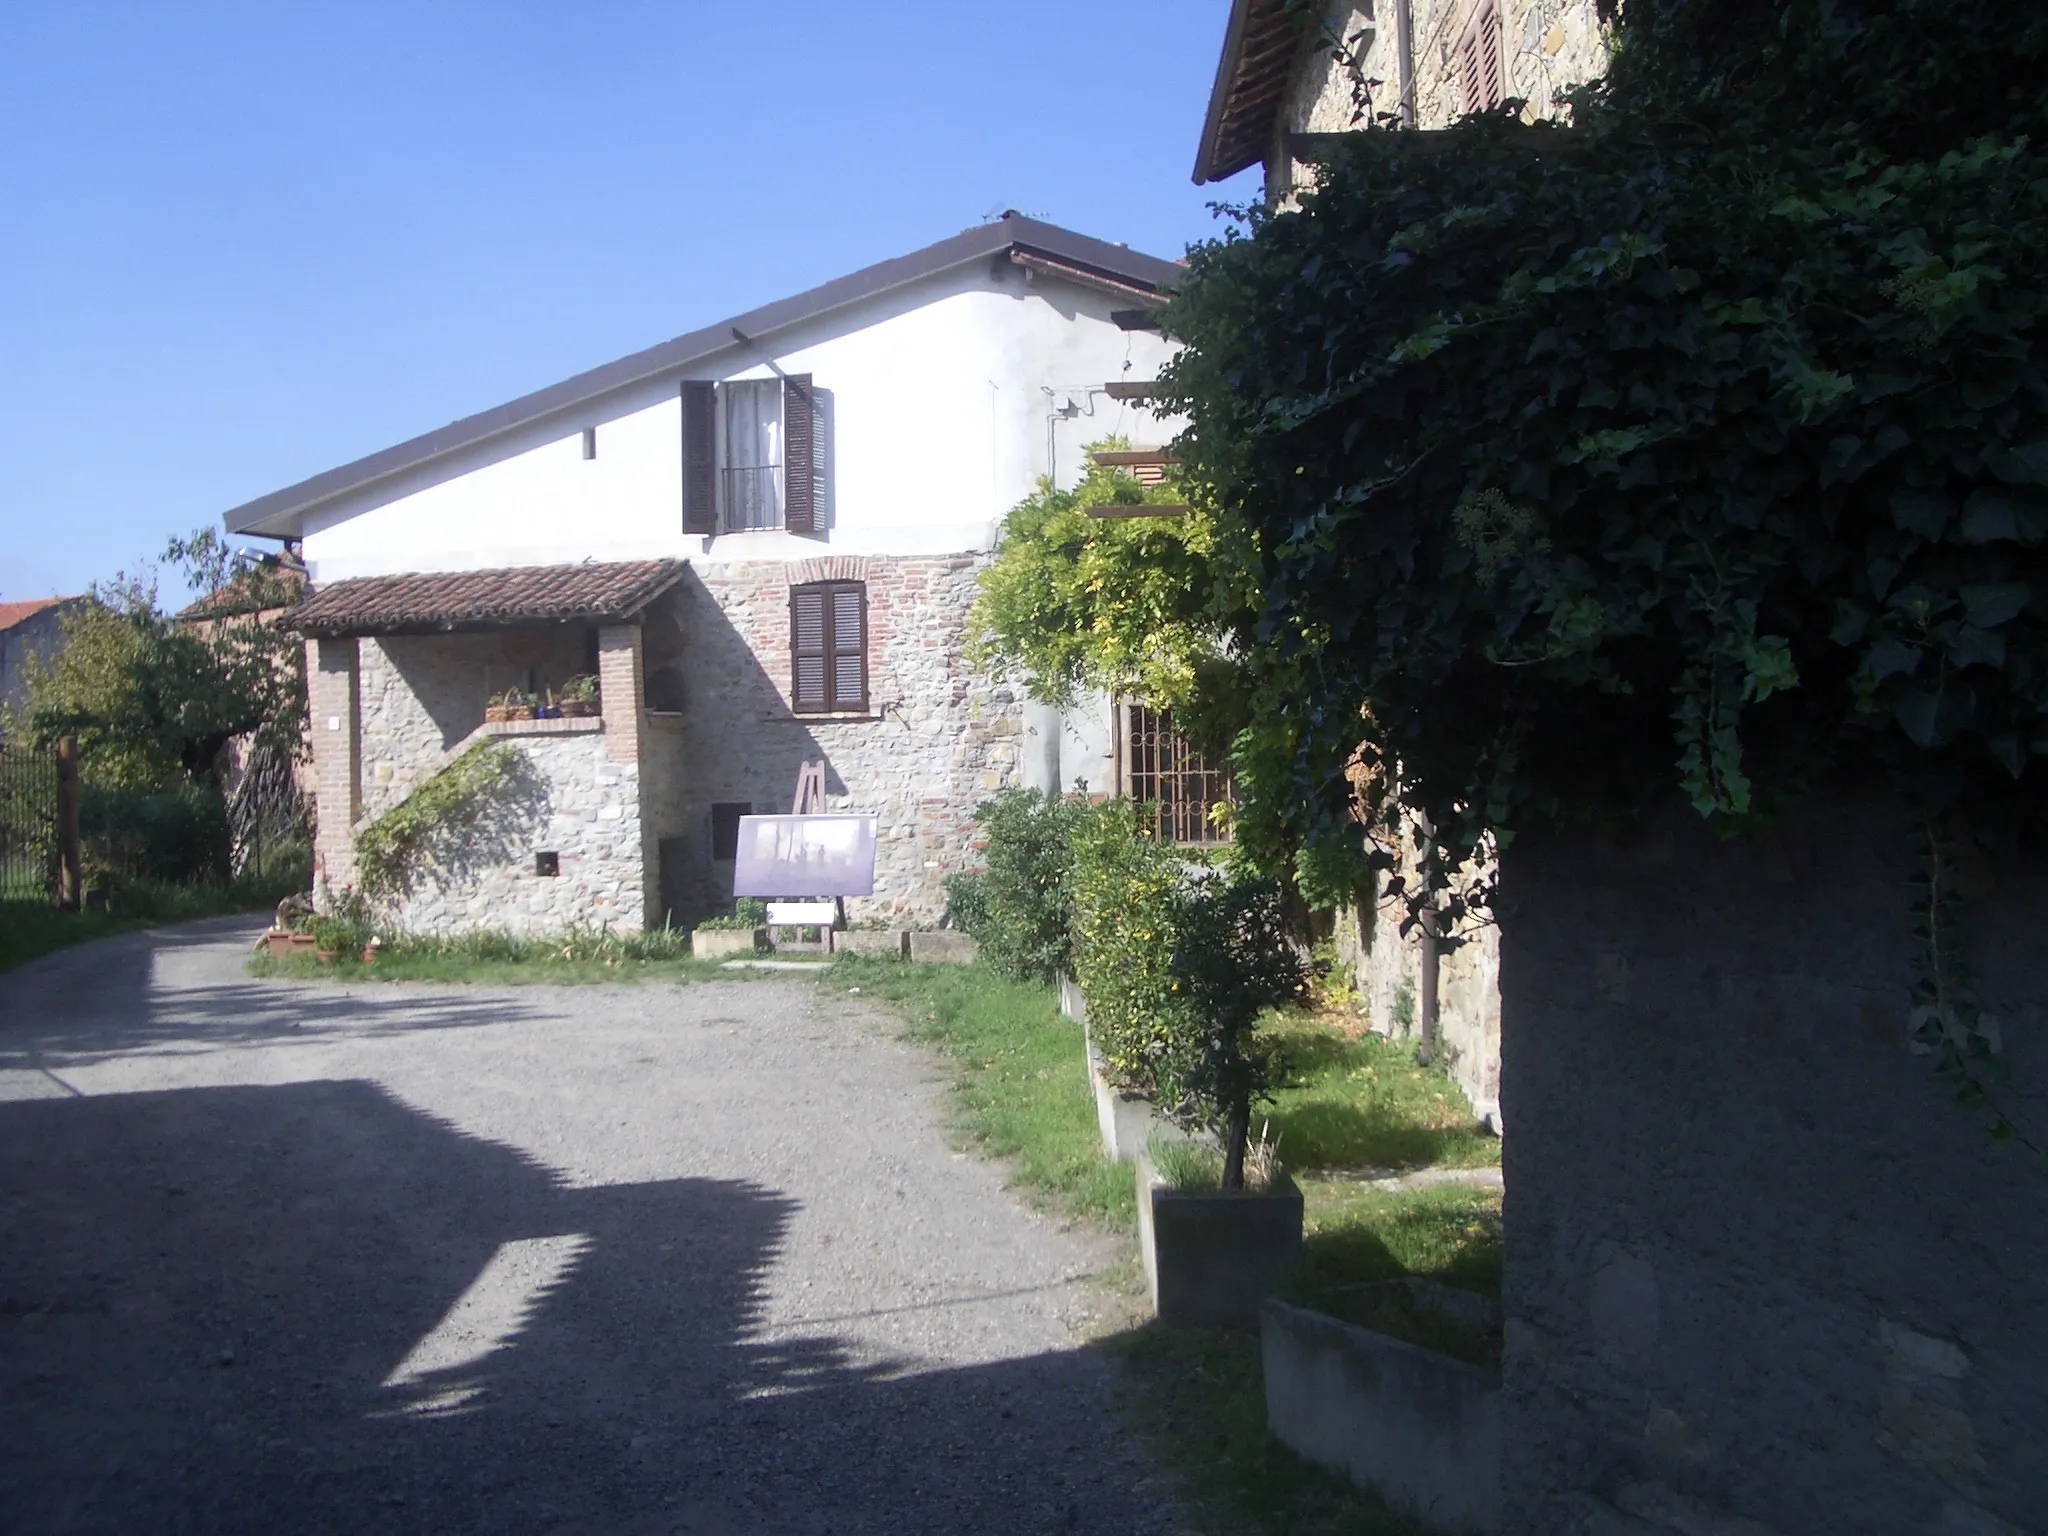 Photo showing: House and courtyard  of the painter Pelizza da Volpedo, Volpedo, Alessandria, Italy